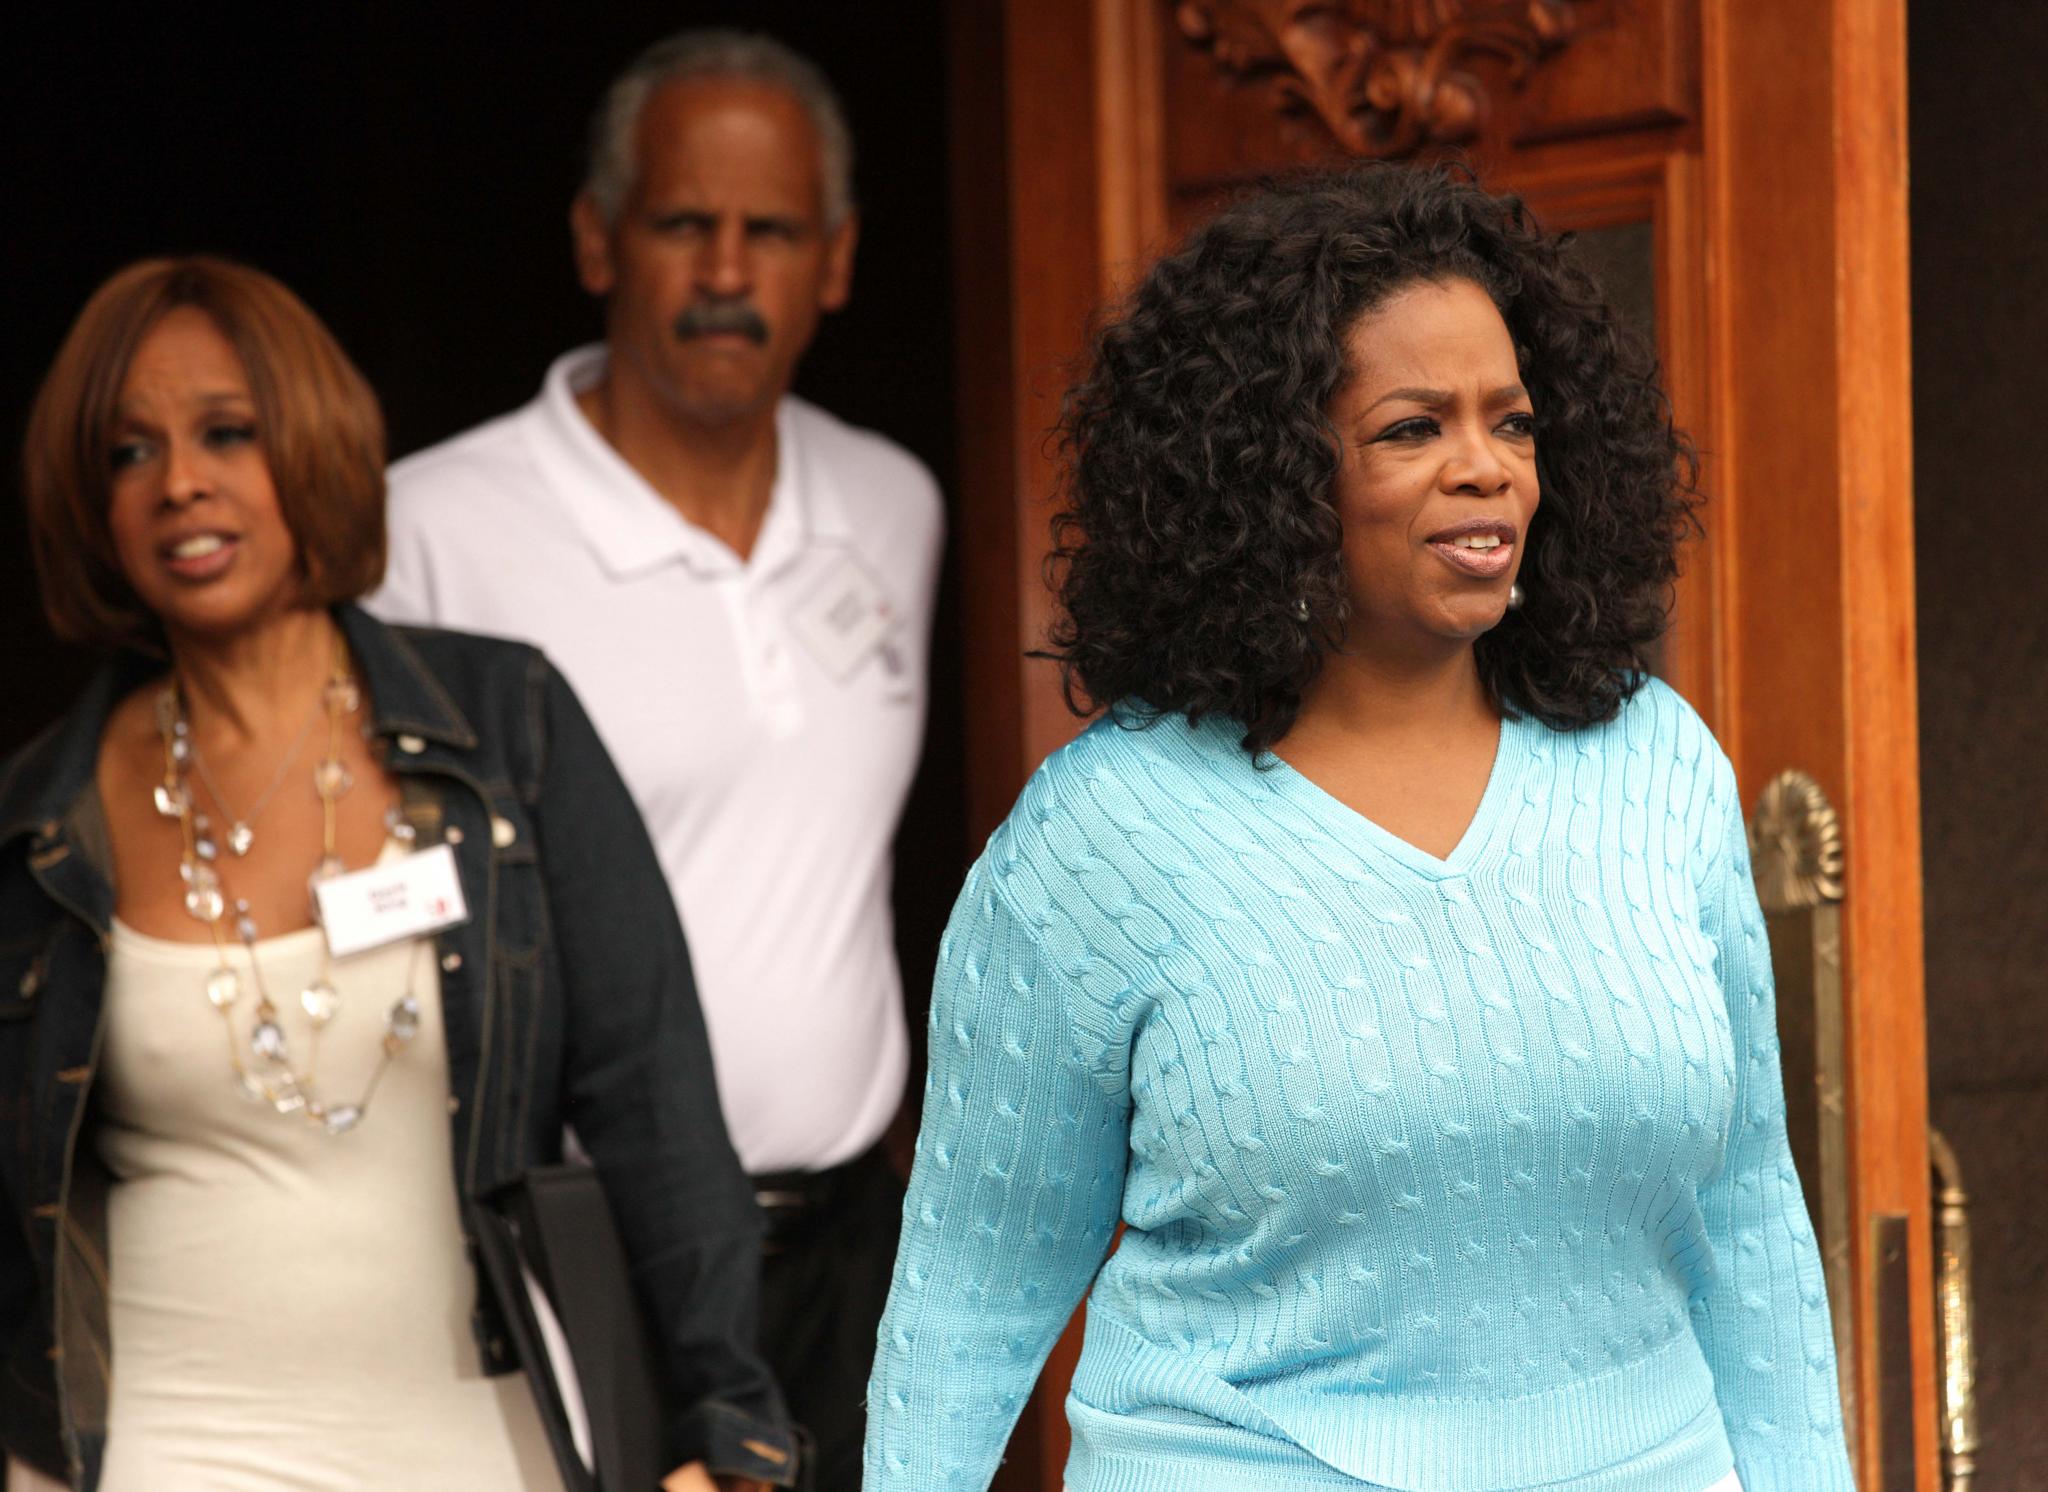 #SquadGoals: 10 Lessons We've Learned From Oprah and Gayle's Friendship
